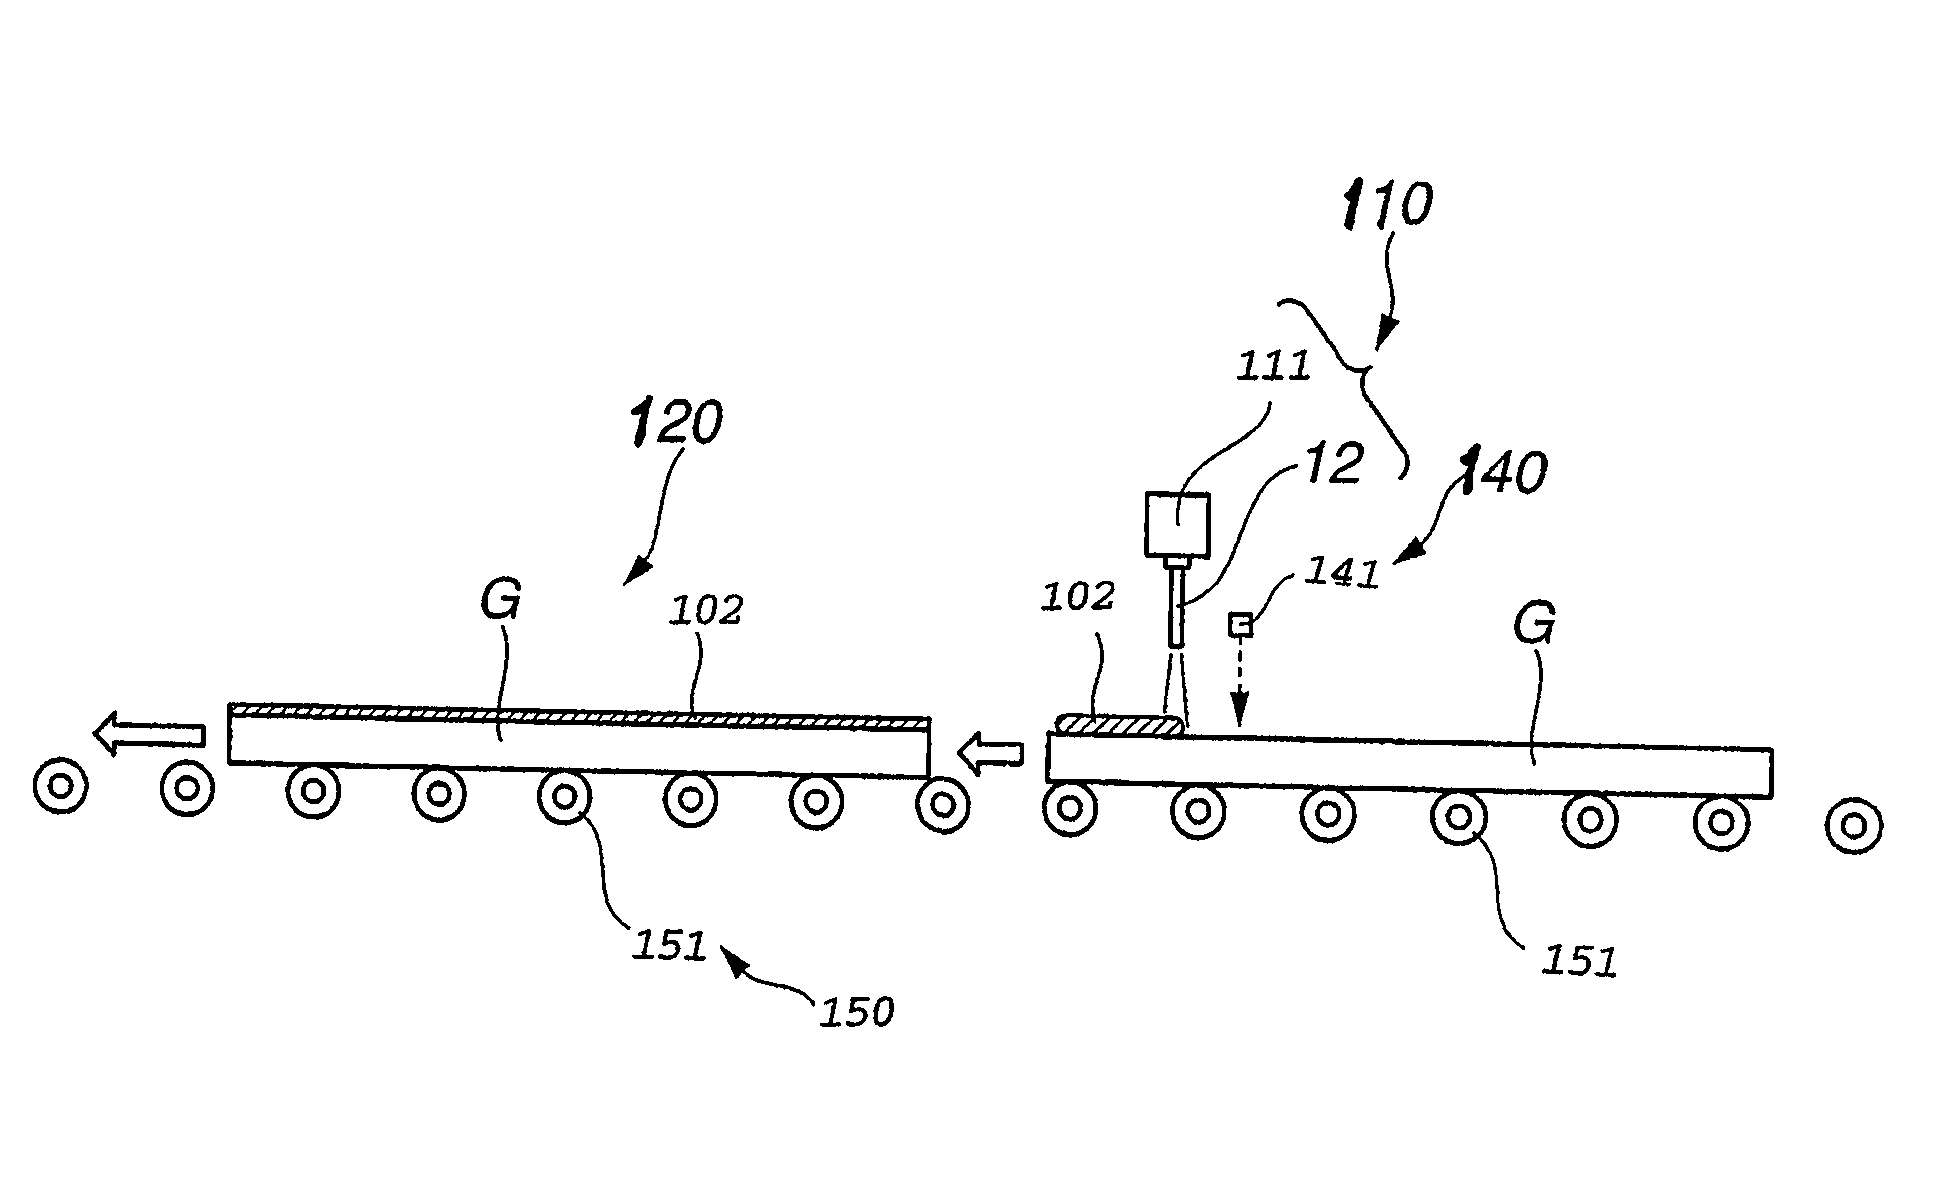 Apparatus and method of applying a coating solution